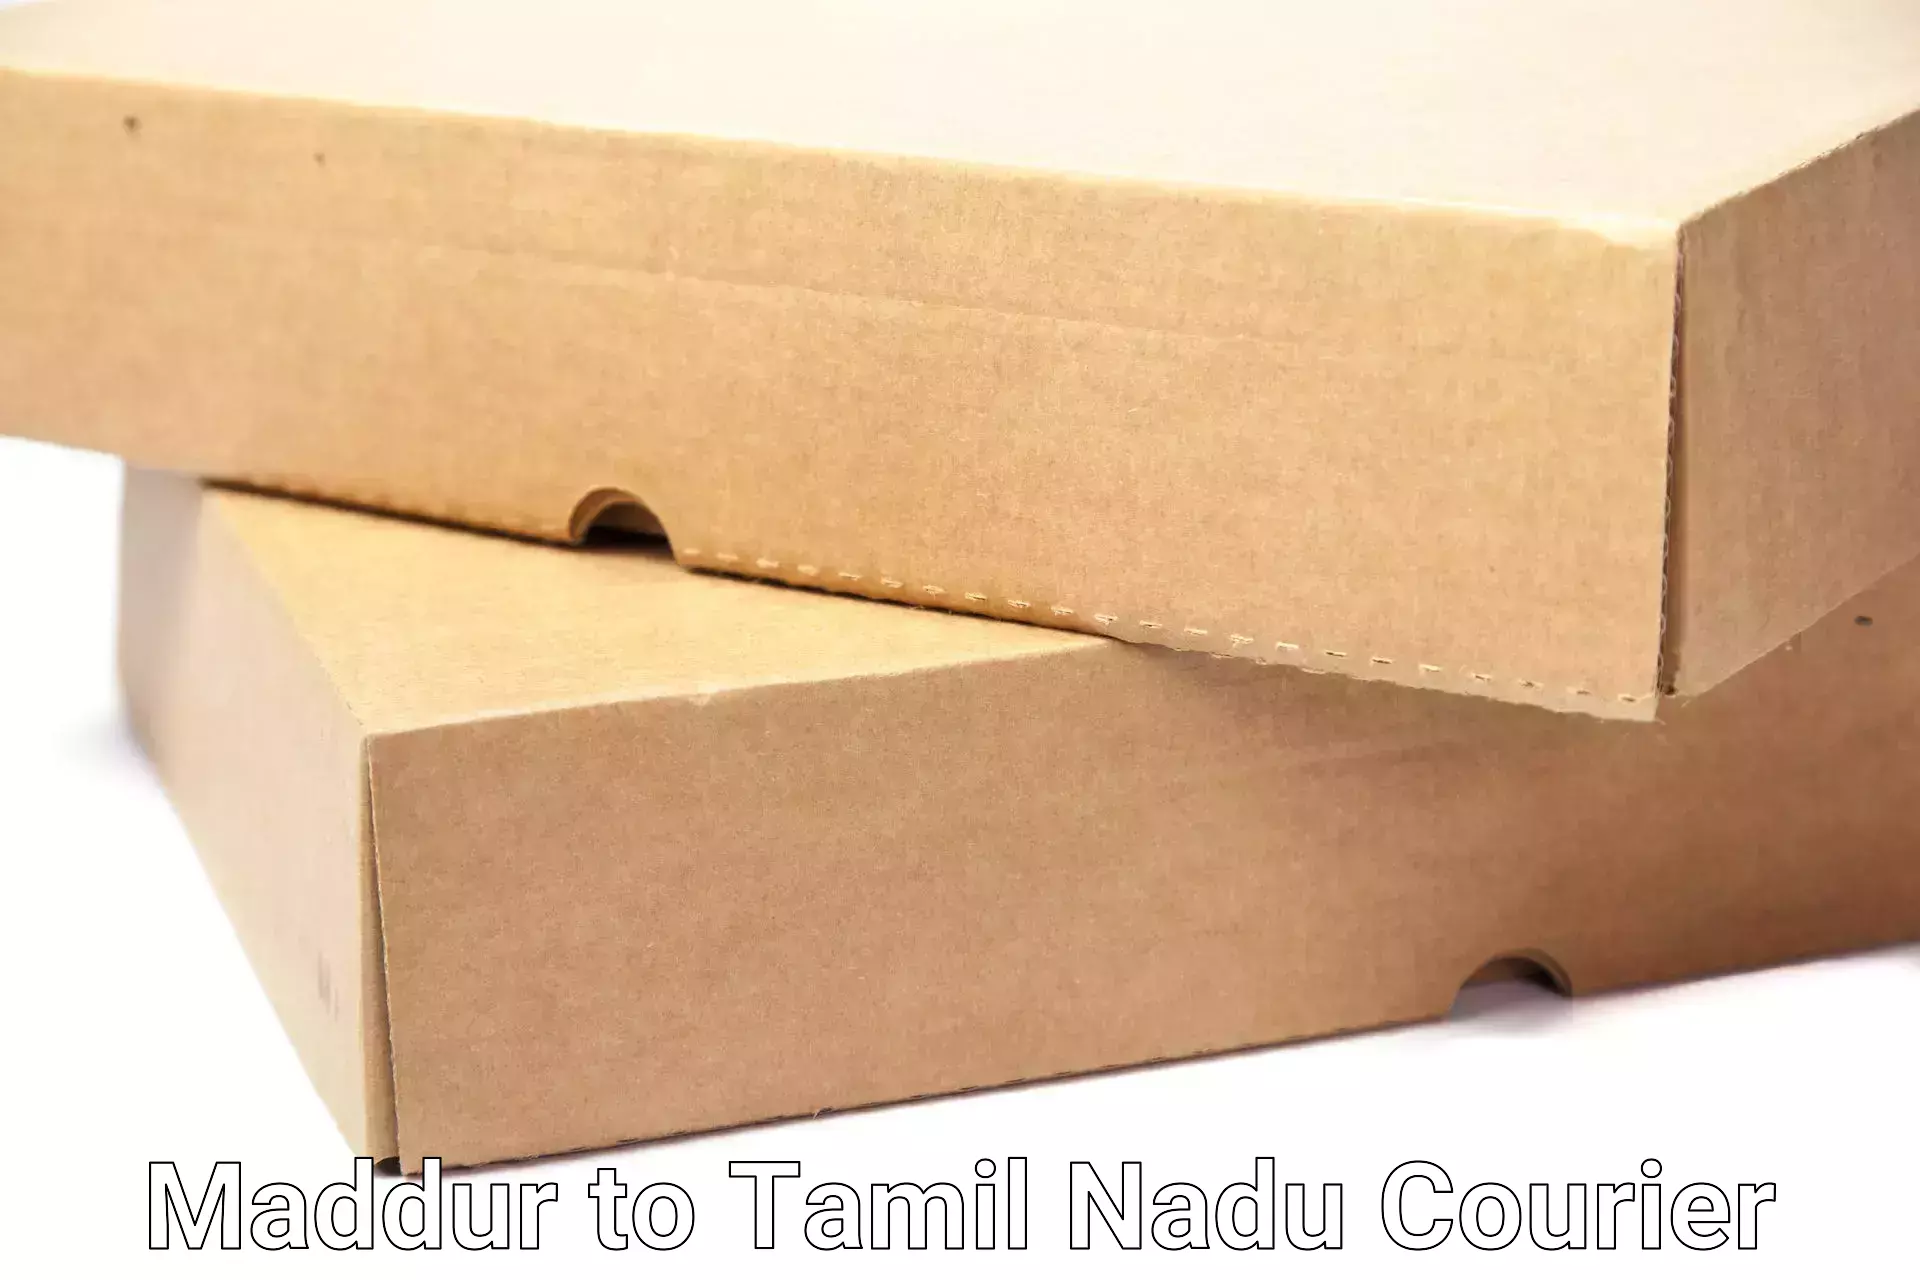 Professional moving assistance in Maddur to Tamil Nadu